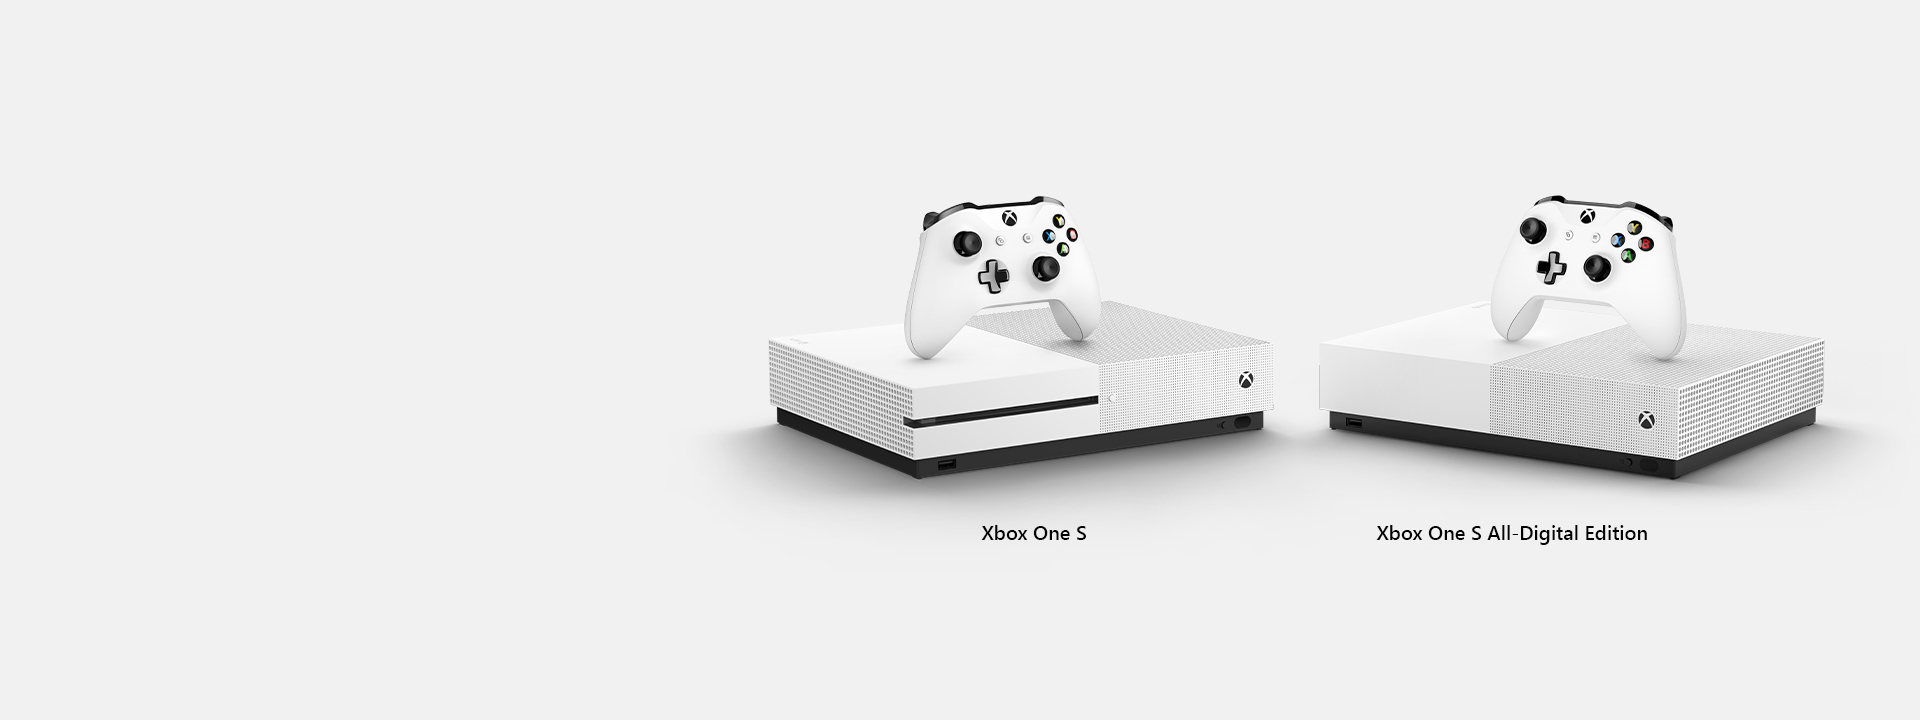 Xbox One S and Xbox One S All Digital Edition